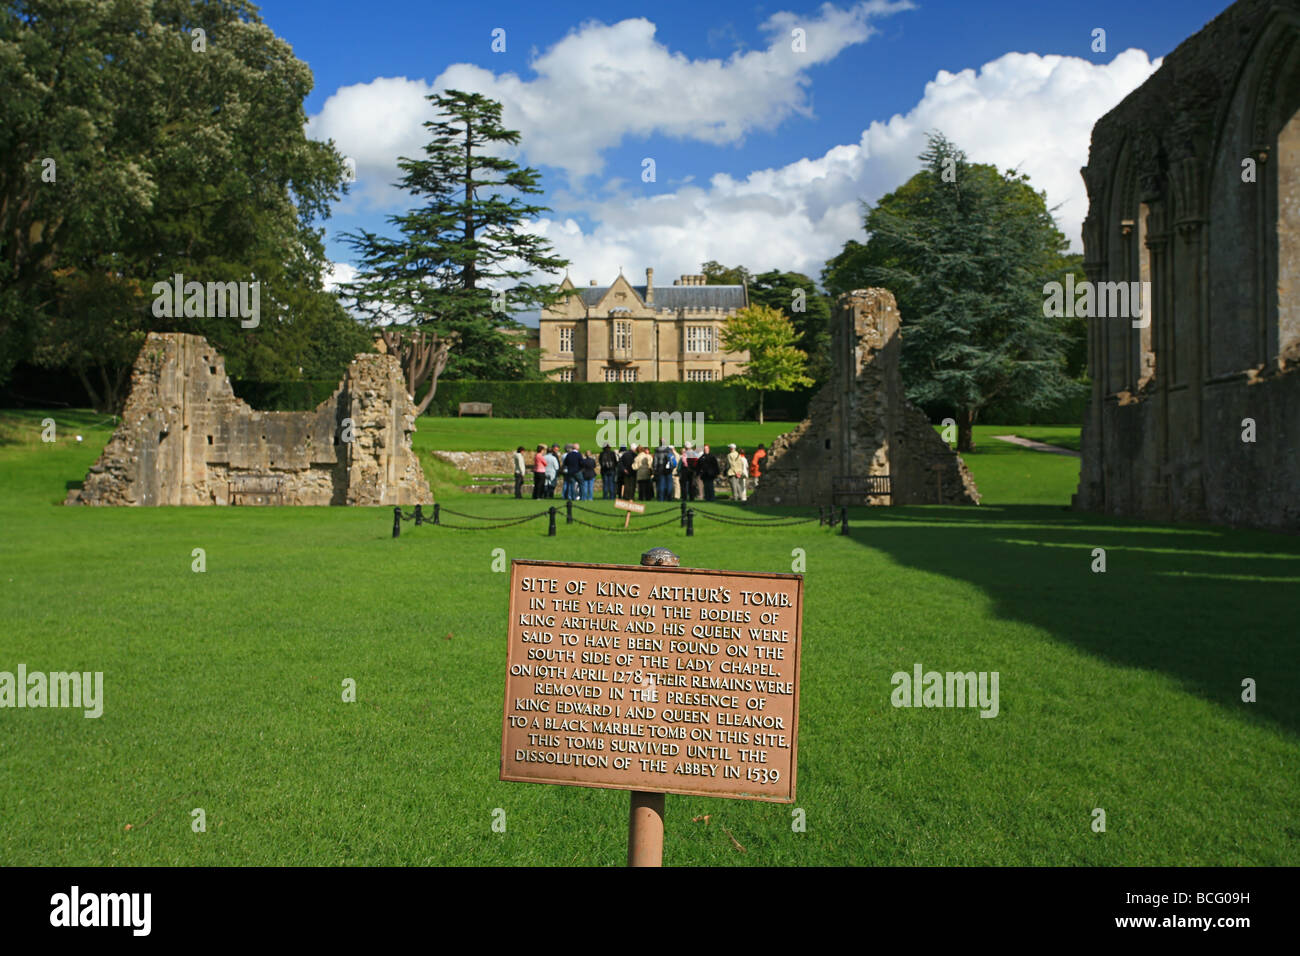 A group of visitors get a guided tour of Glastonbury Abbey ruins at the site of King Arthurs tomb, Somerset, England, UK Stock Photo